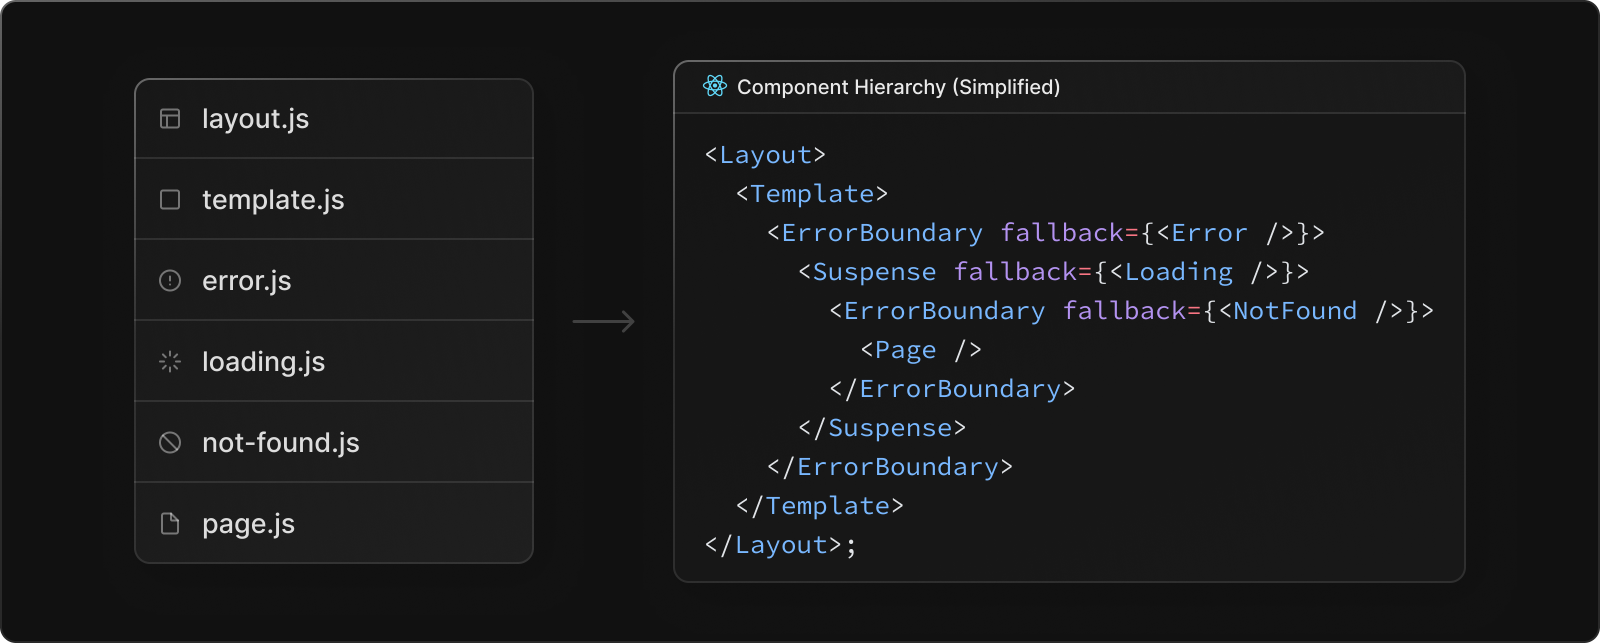 Rendered component hierarchy